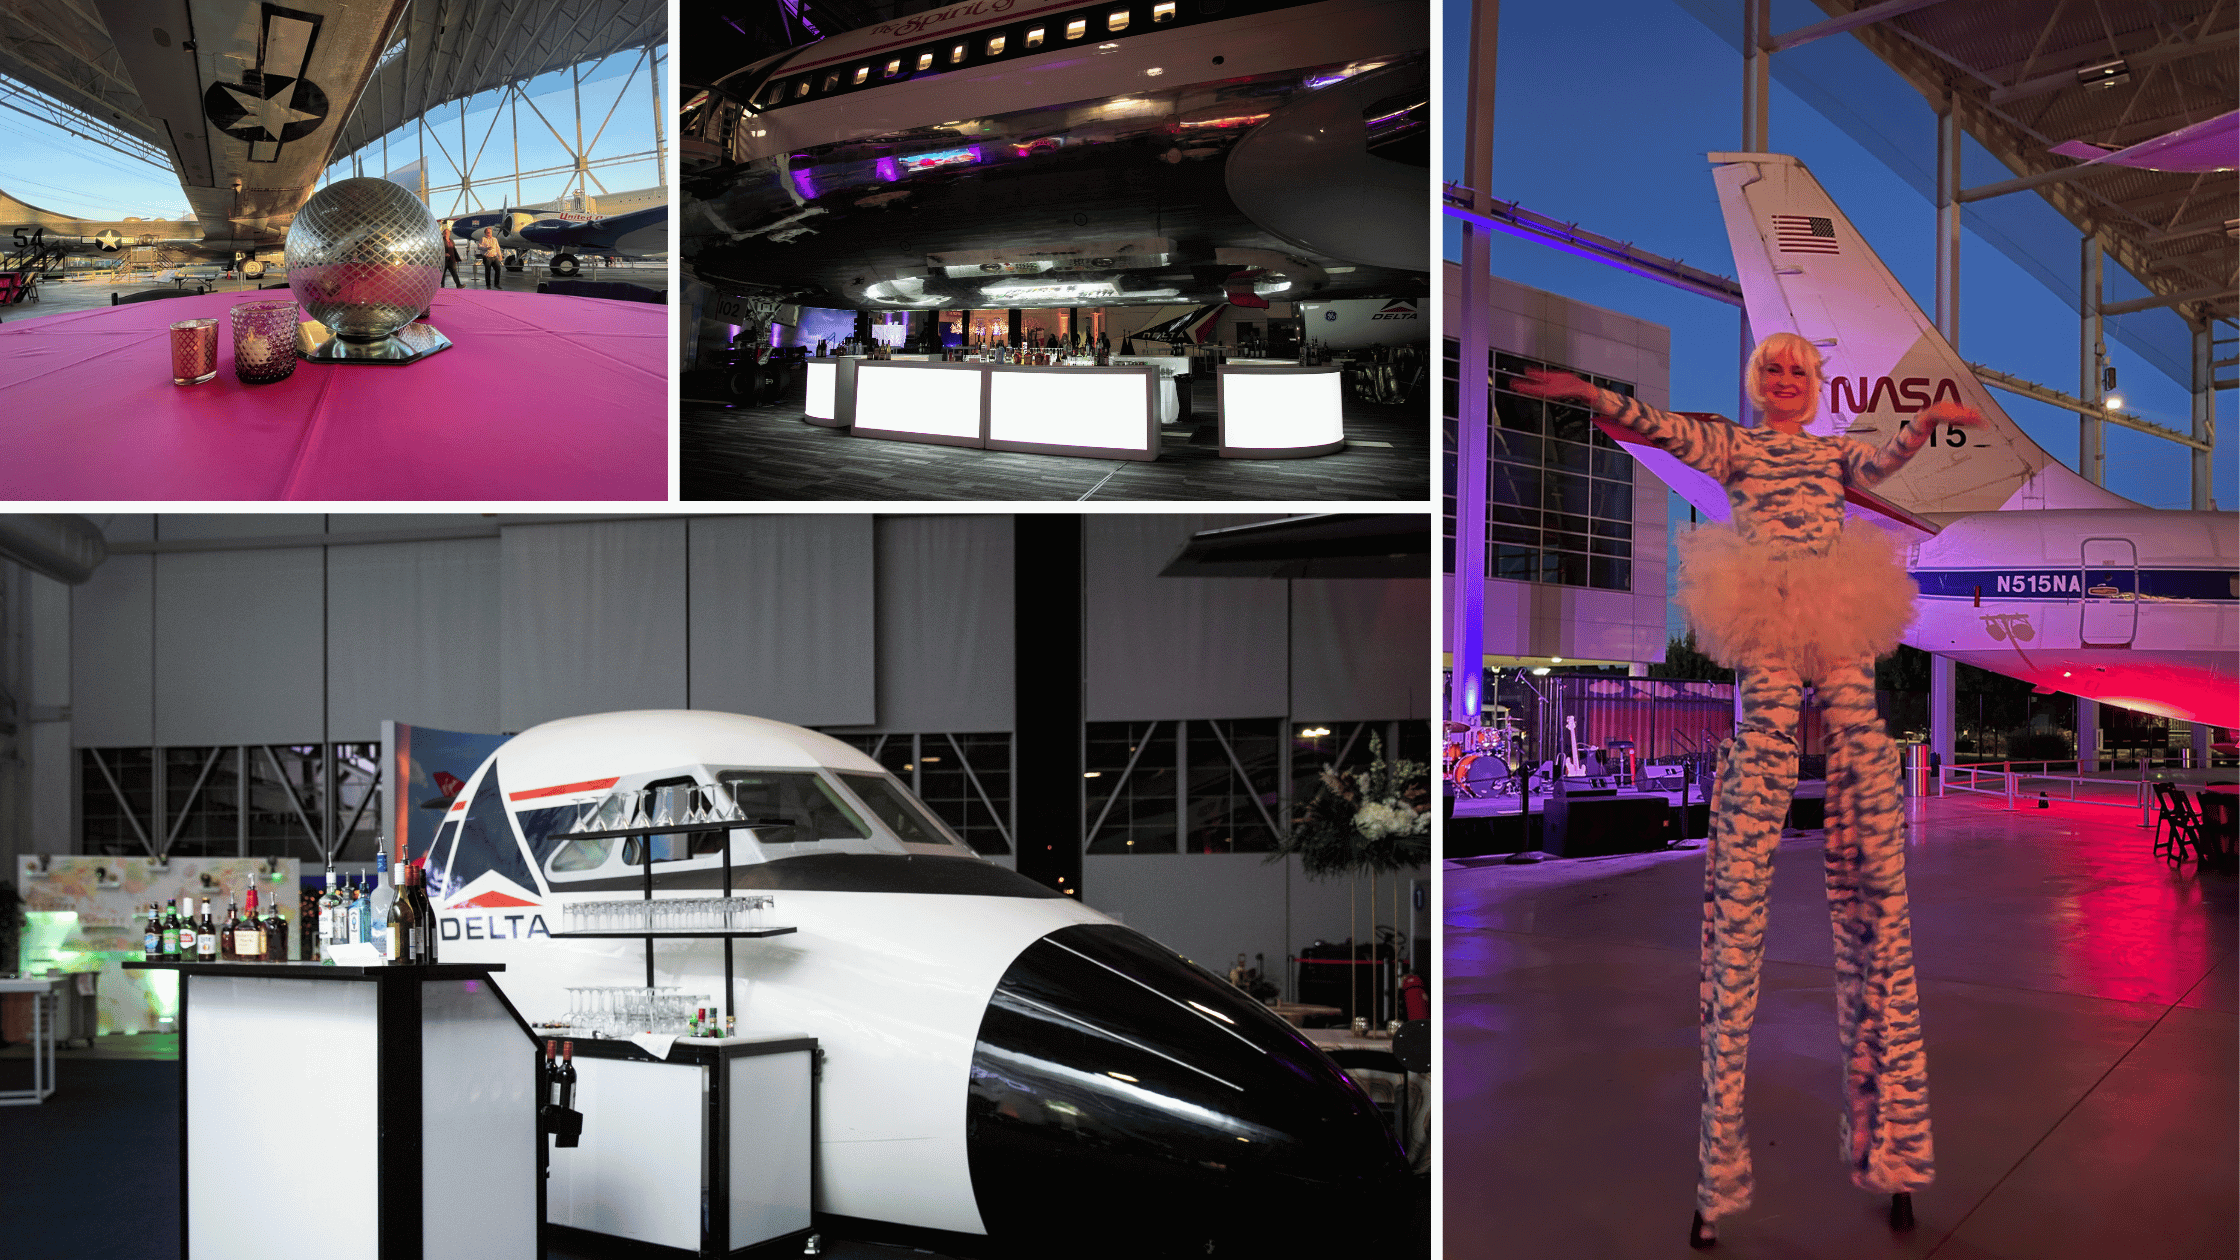 Hosts Global | Aviation Venues for Events